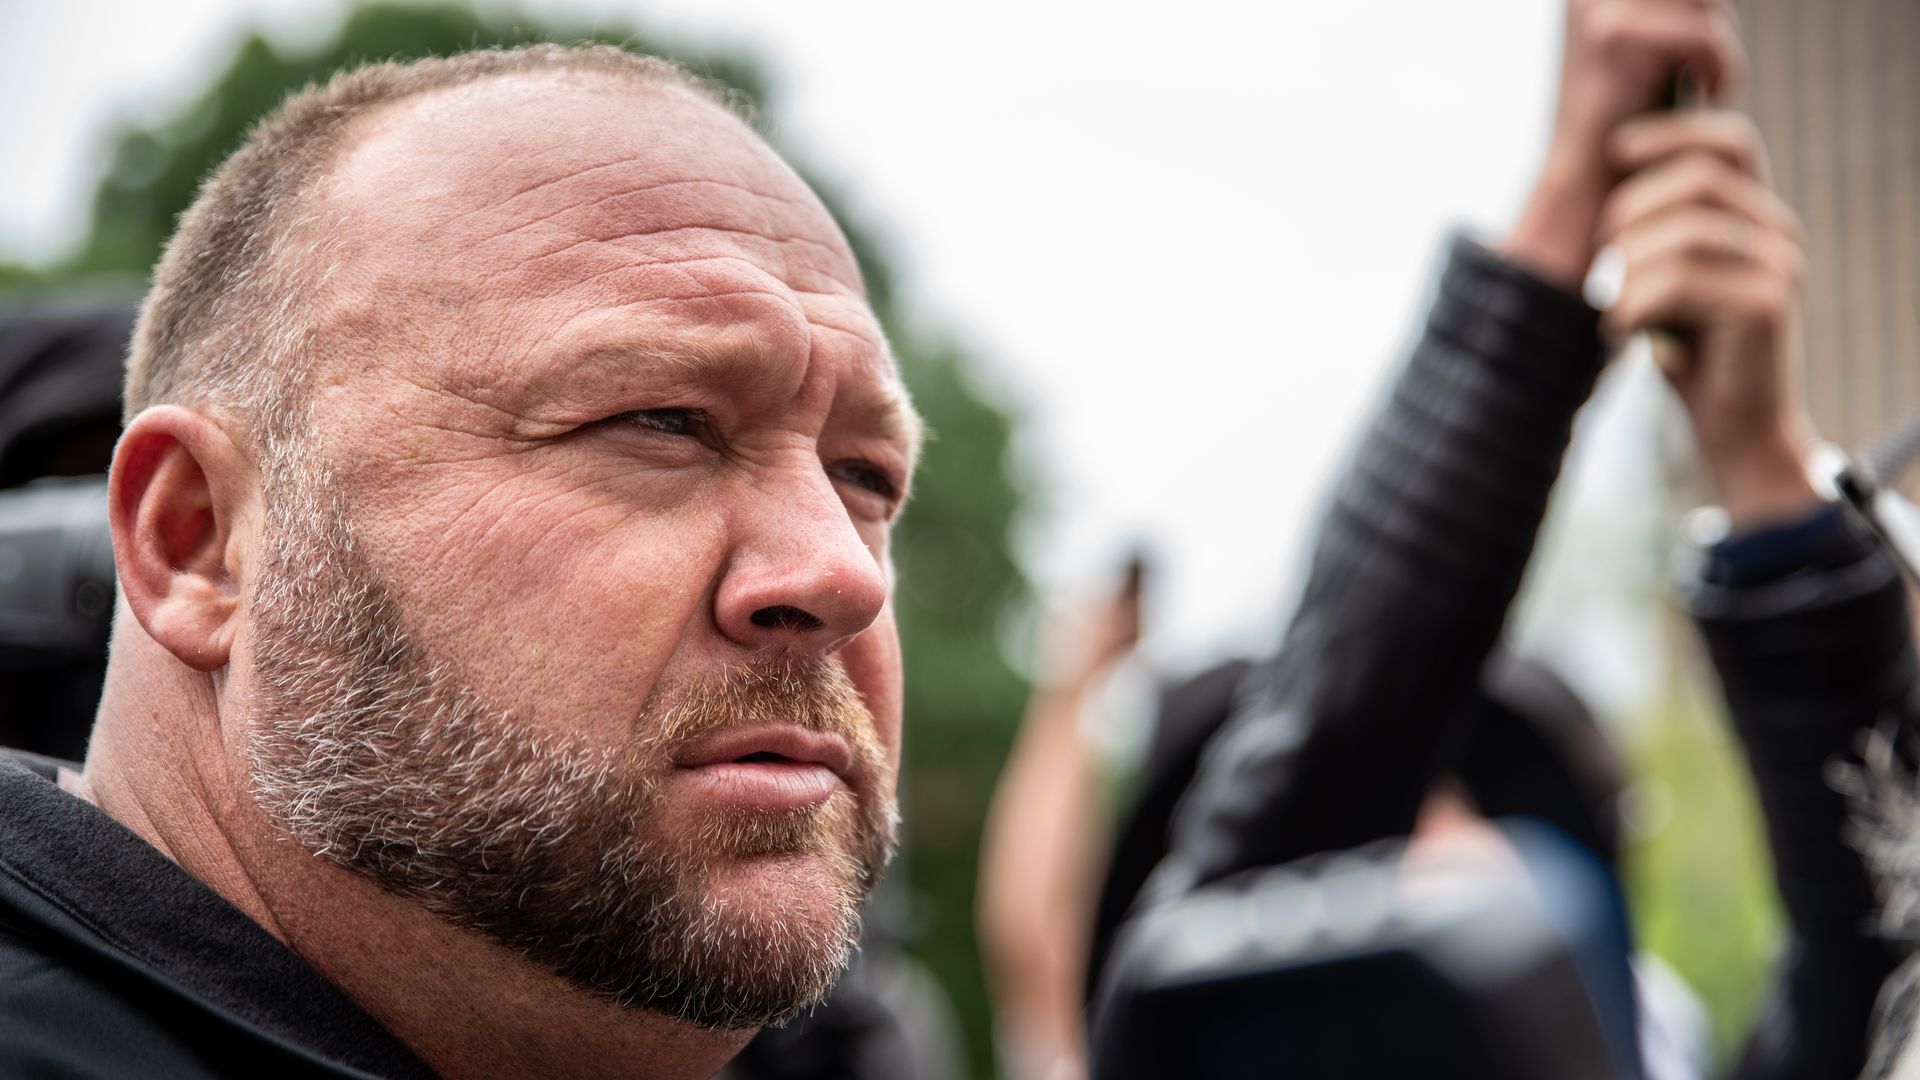  Infowars founder Alex Jones listens to a supporter at the Texas State Capital building on April 18, 2020 in Austin, Texas. 